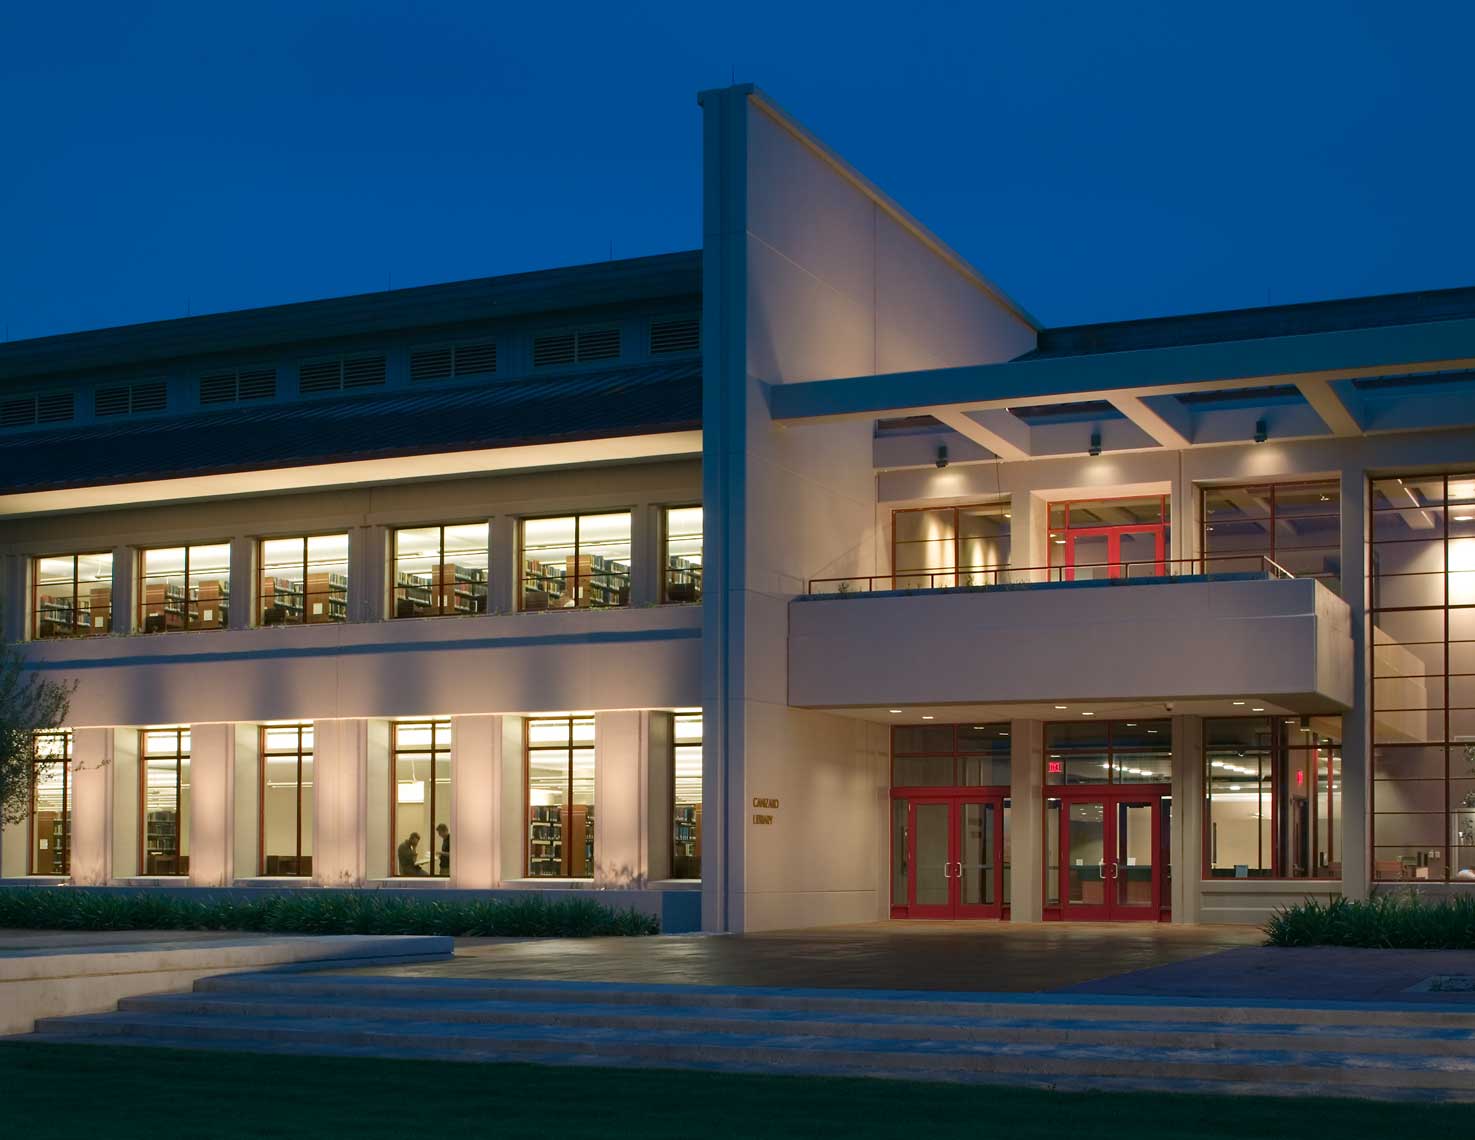 A twilight view of the glowing Ave Maria University Library in Naples, Florida